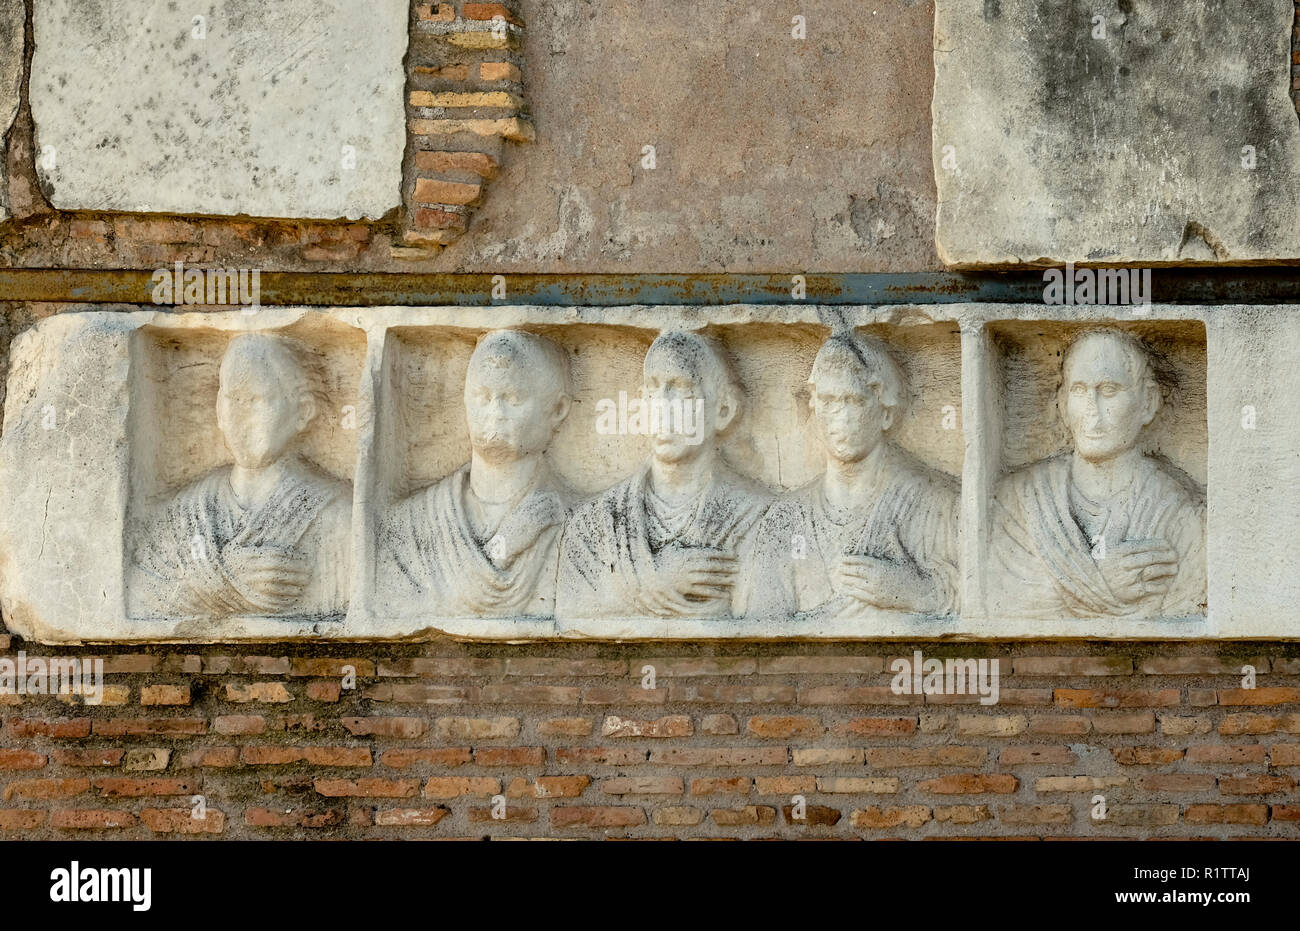 In the Ilario Fusco's tomb on the Appia Antica in Rome, there is a relief with five portraits of deads. Stock Photo